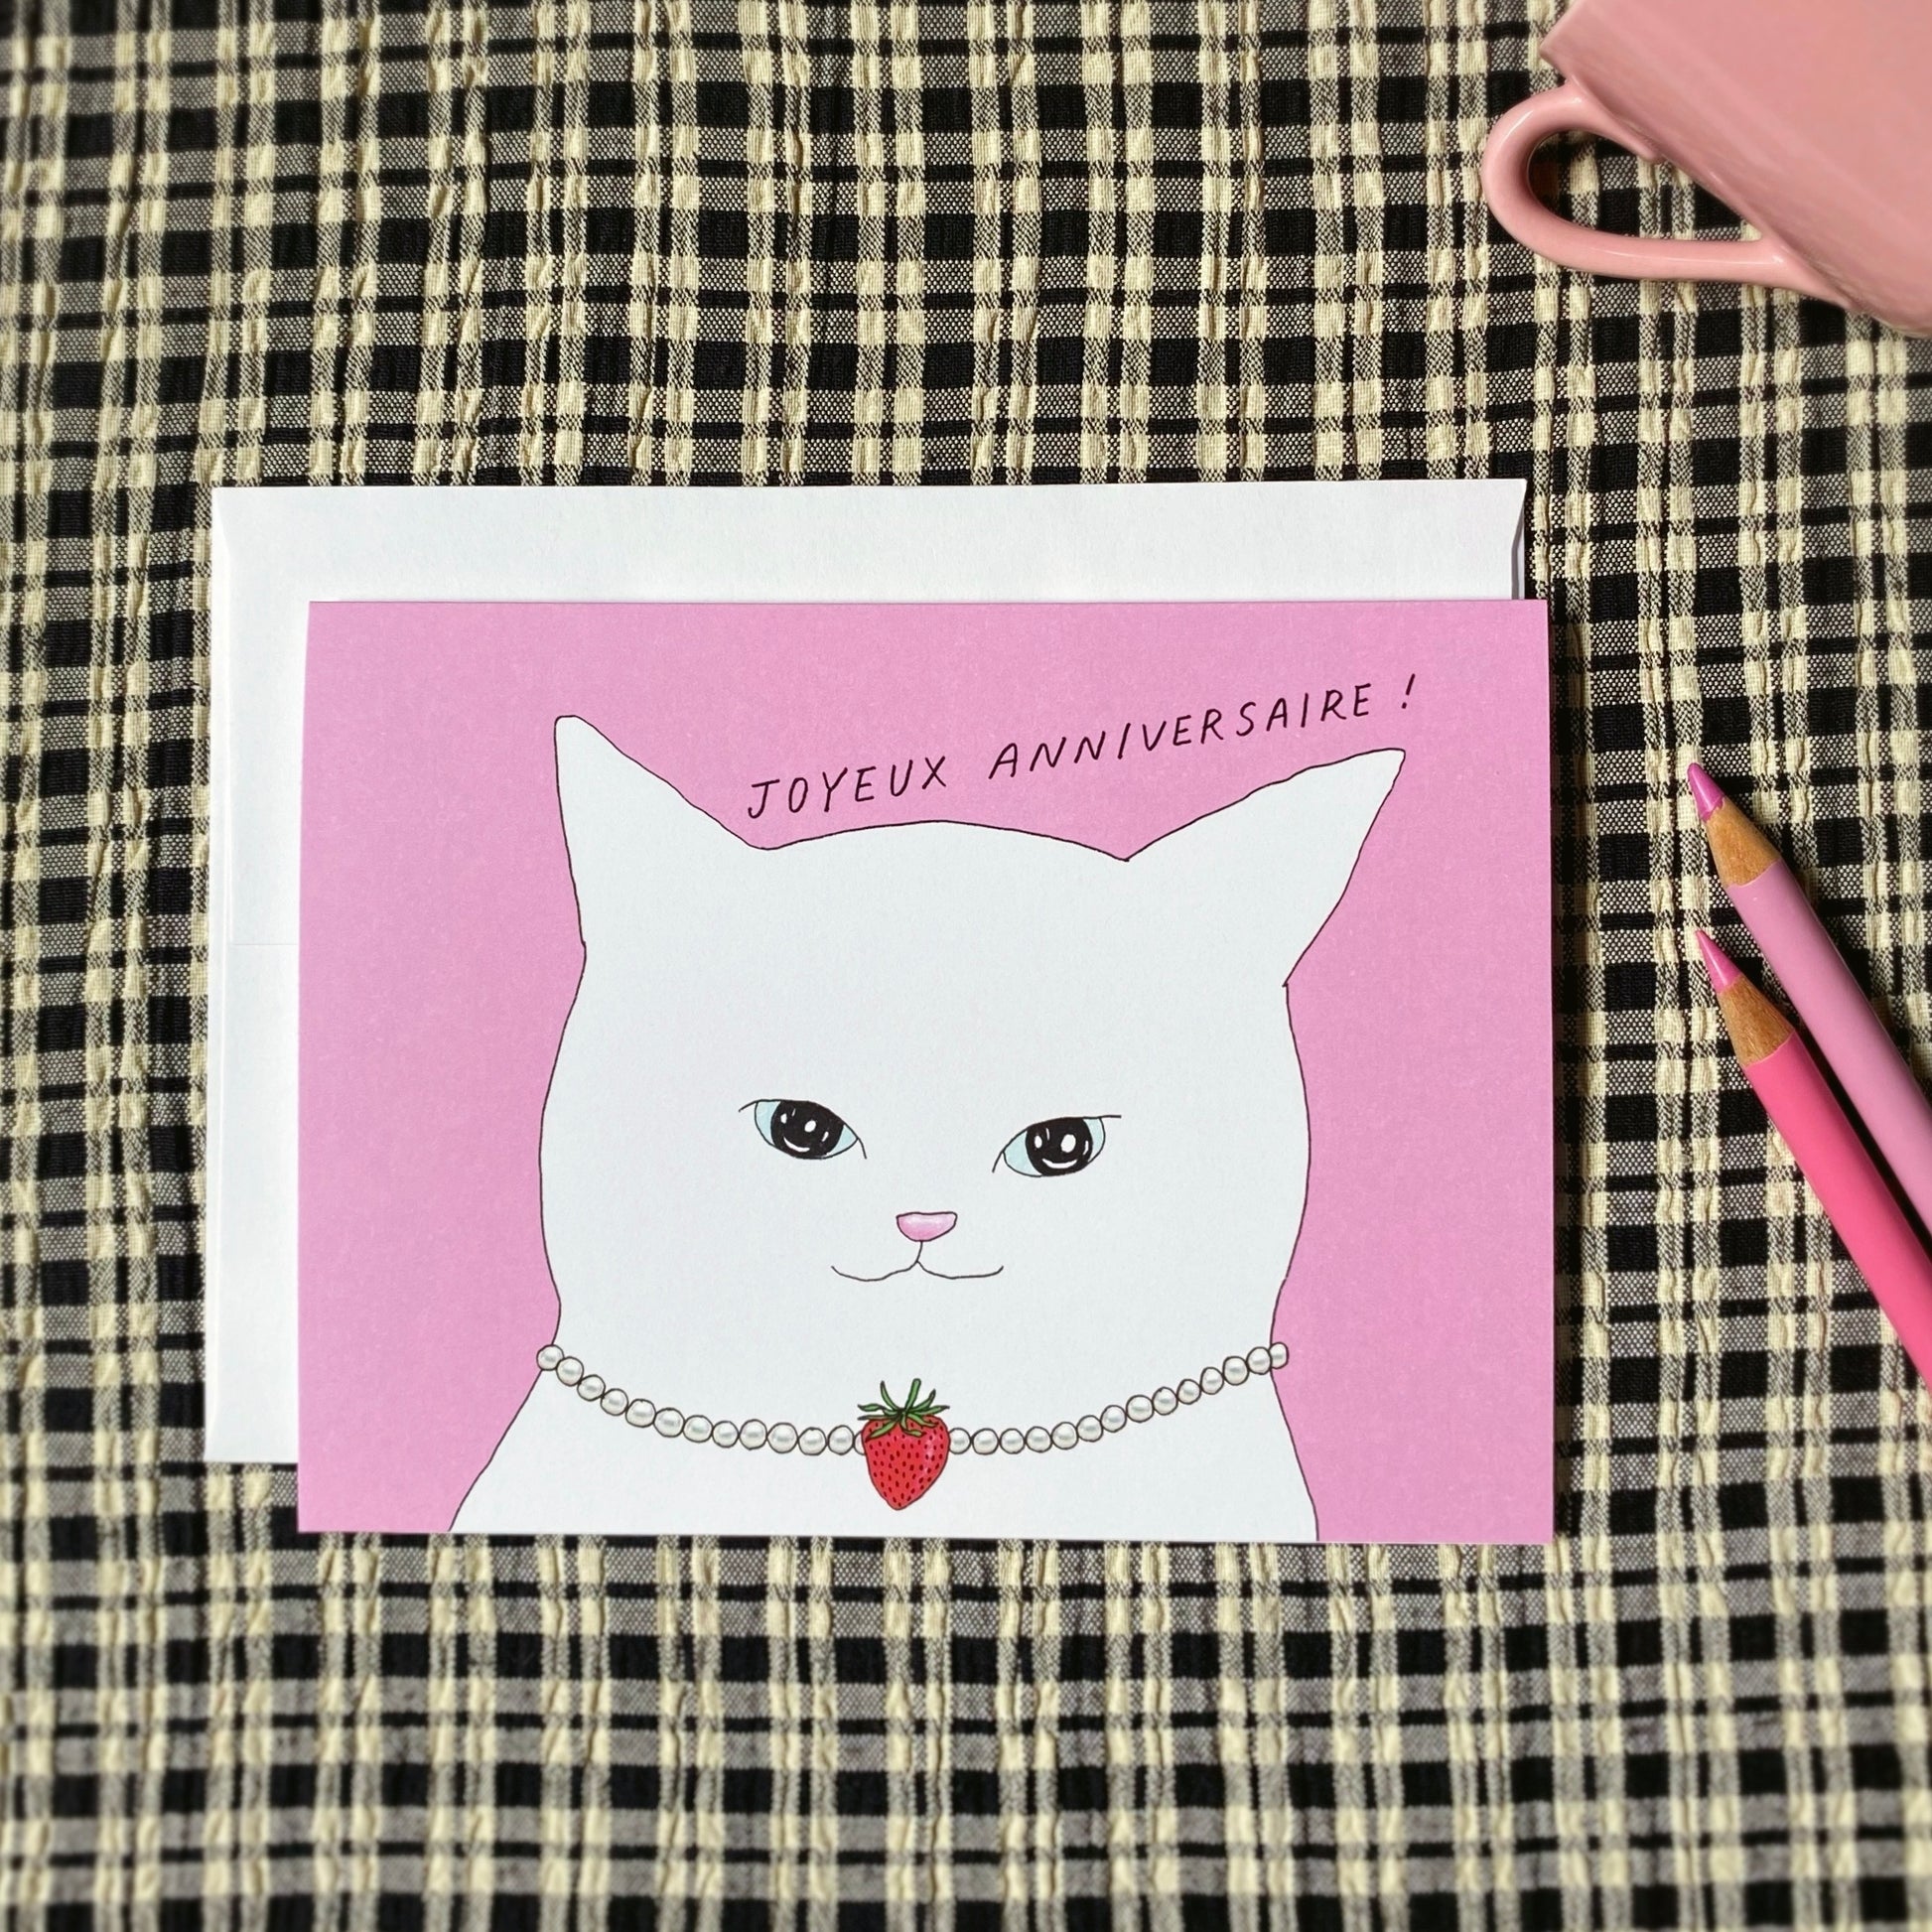 Cute Pink Birthday Card that says “Joyeux Anniversaire!” with a sassy cat wearing a pearl necklace